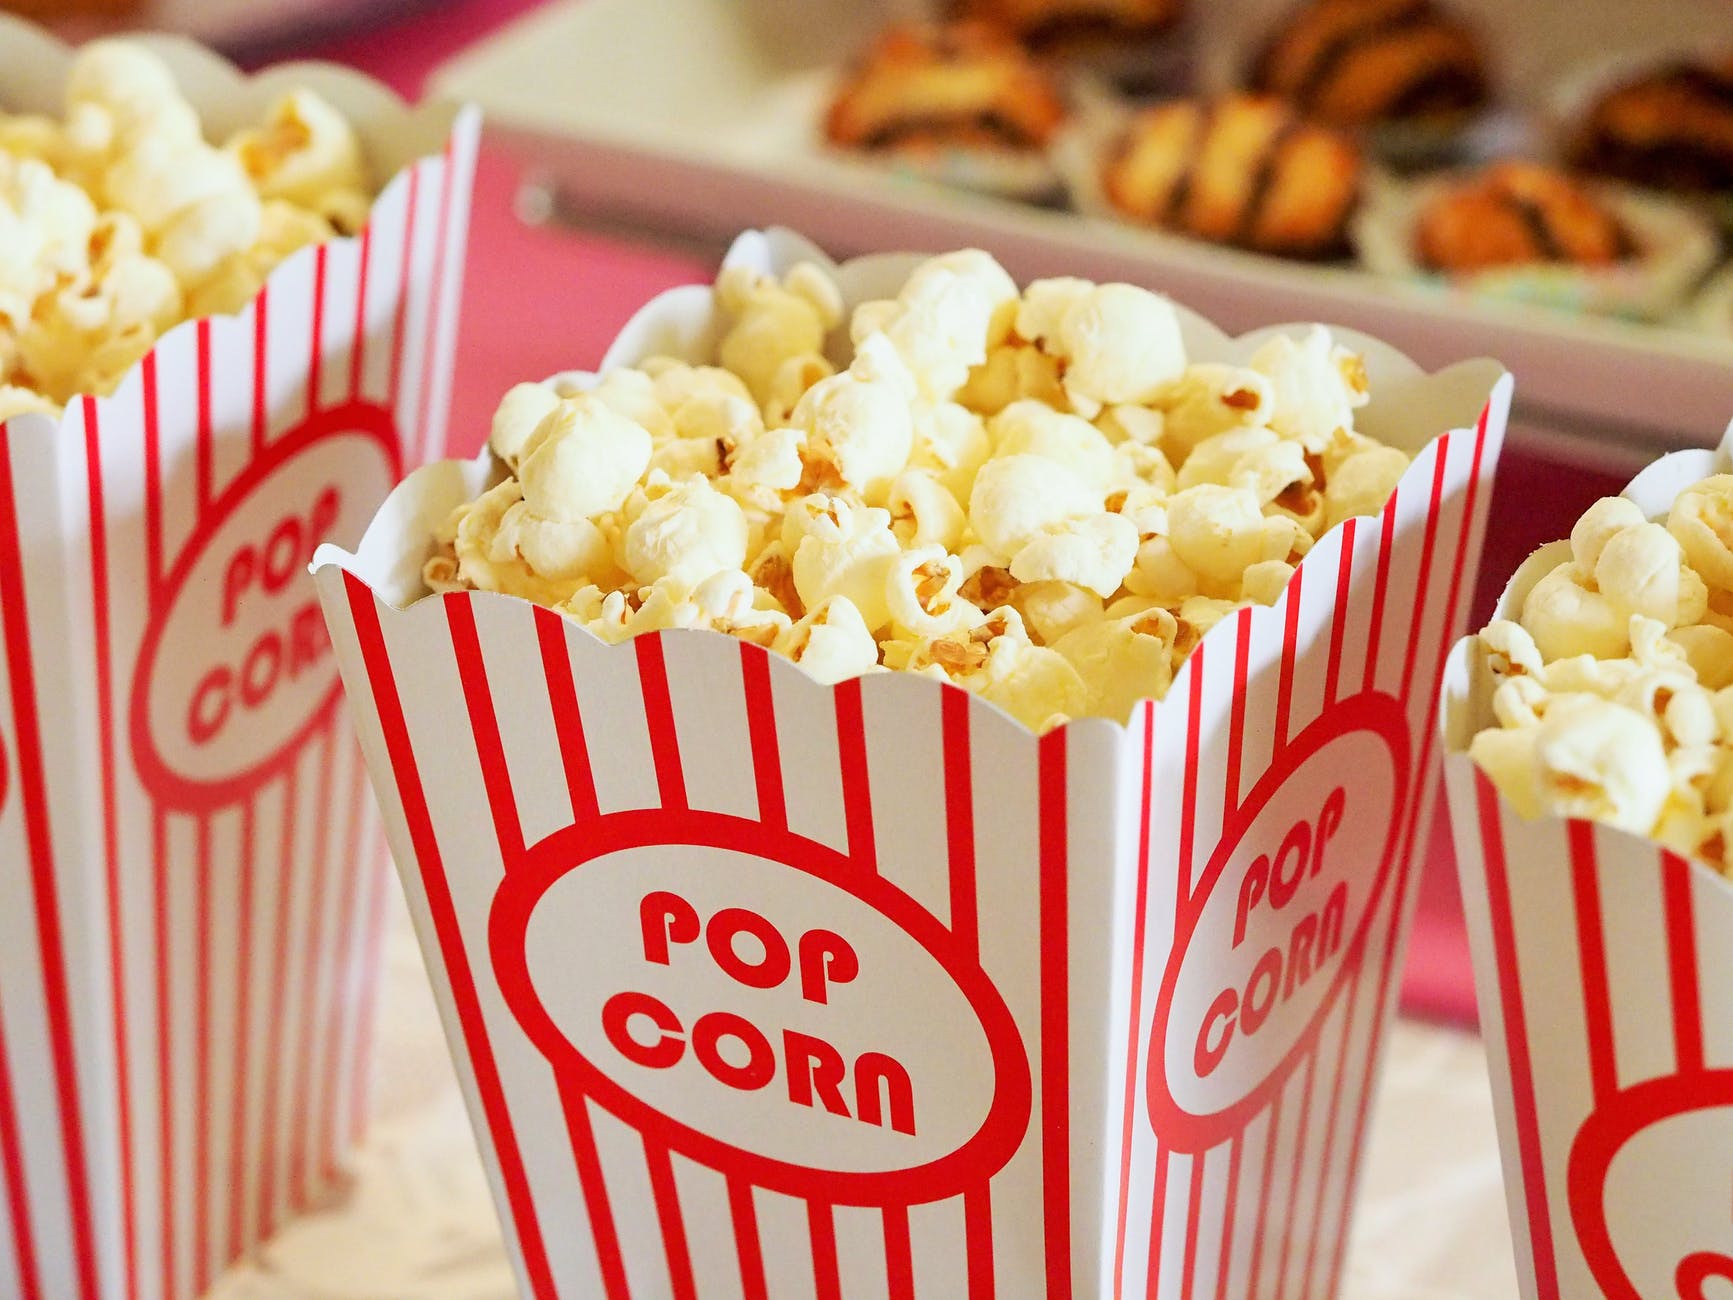 popcorn in white and red striped containers